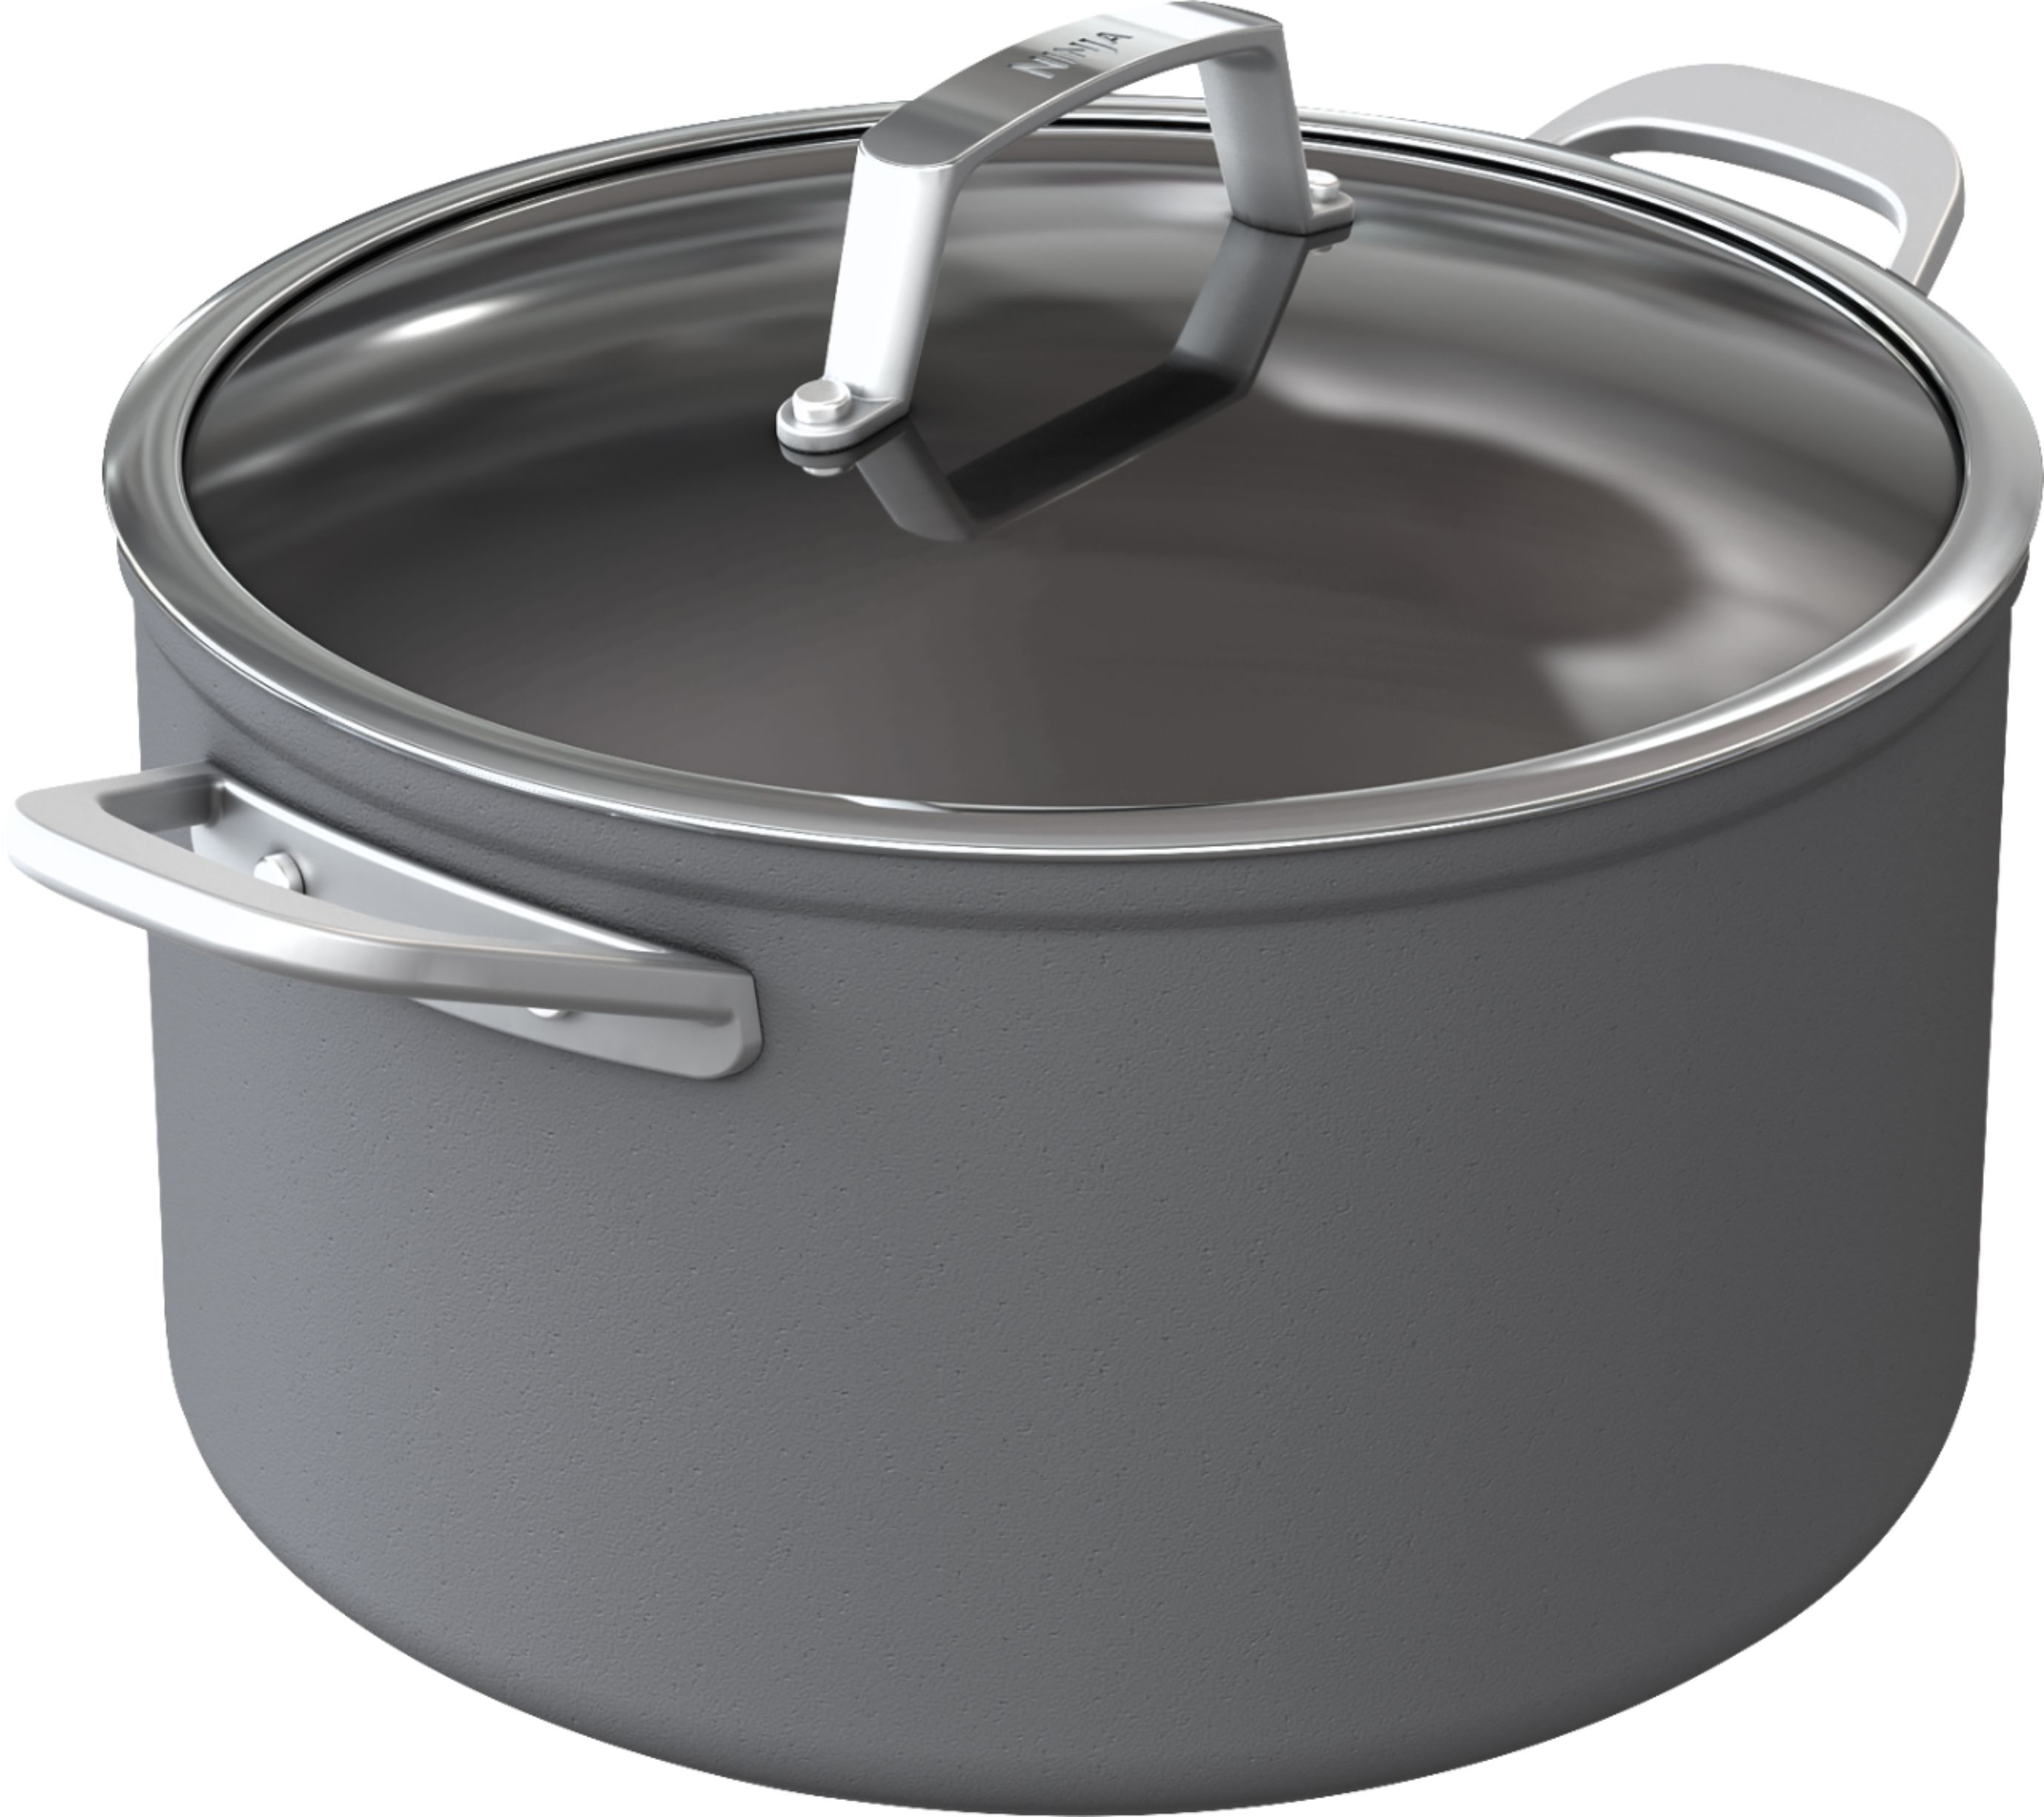 Oster Adenmore 8 Quart Stock Pot with Tempered Glass Lid 